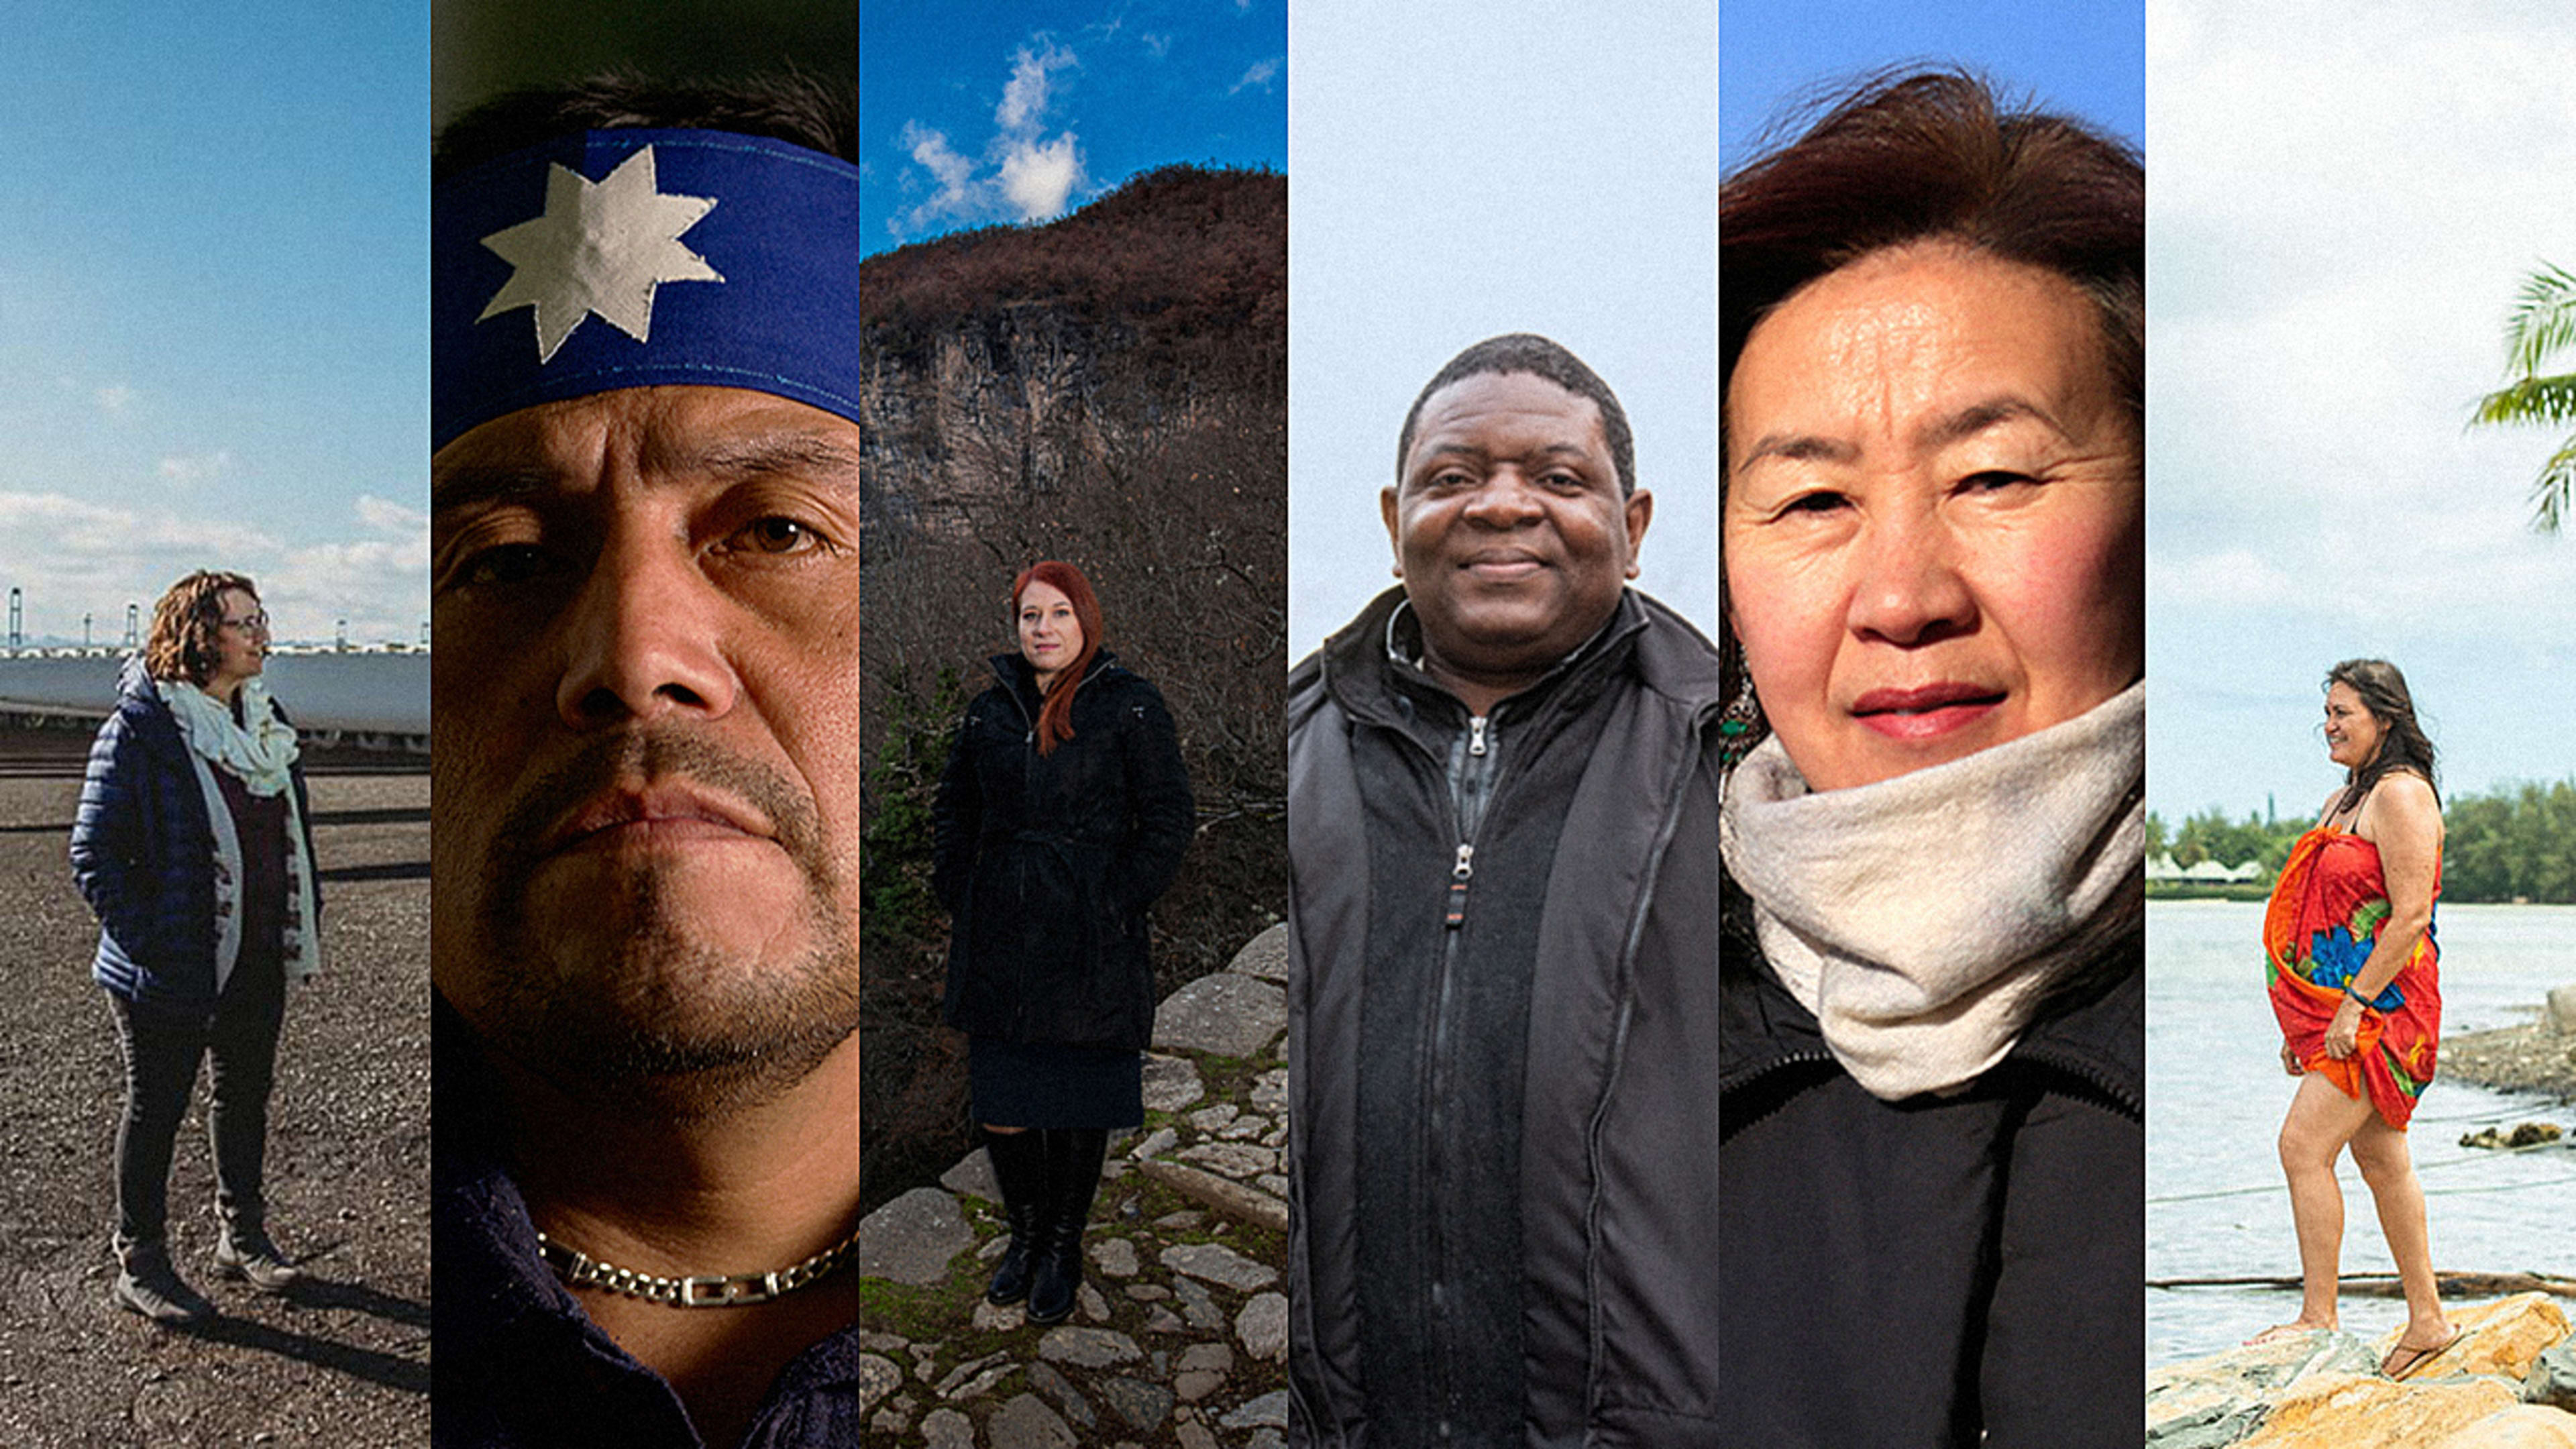 These 6 activists just won a major award for protecting natural resources around the world